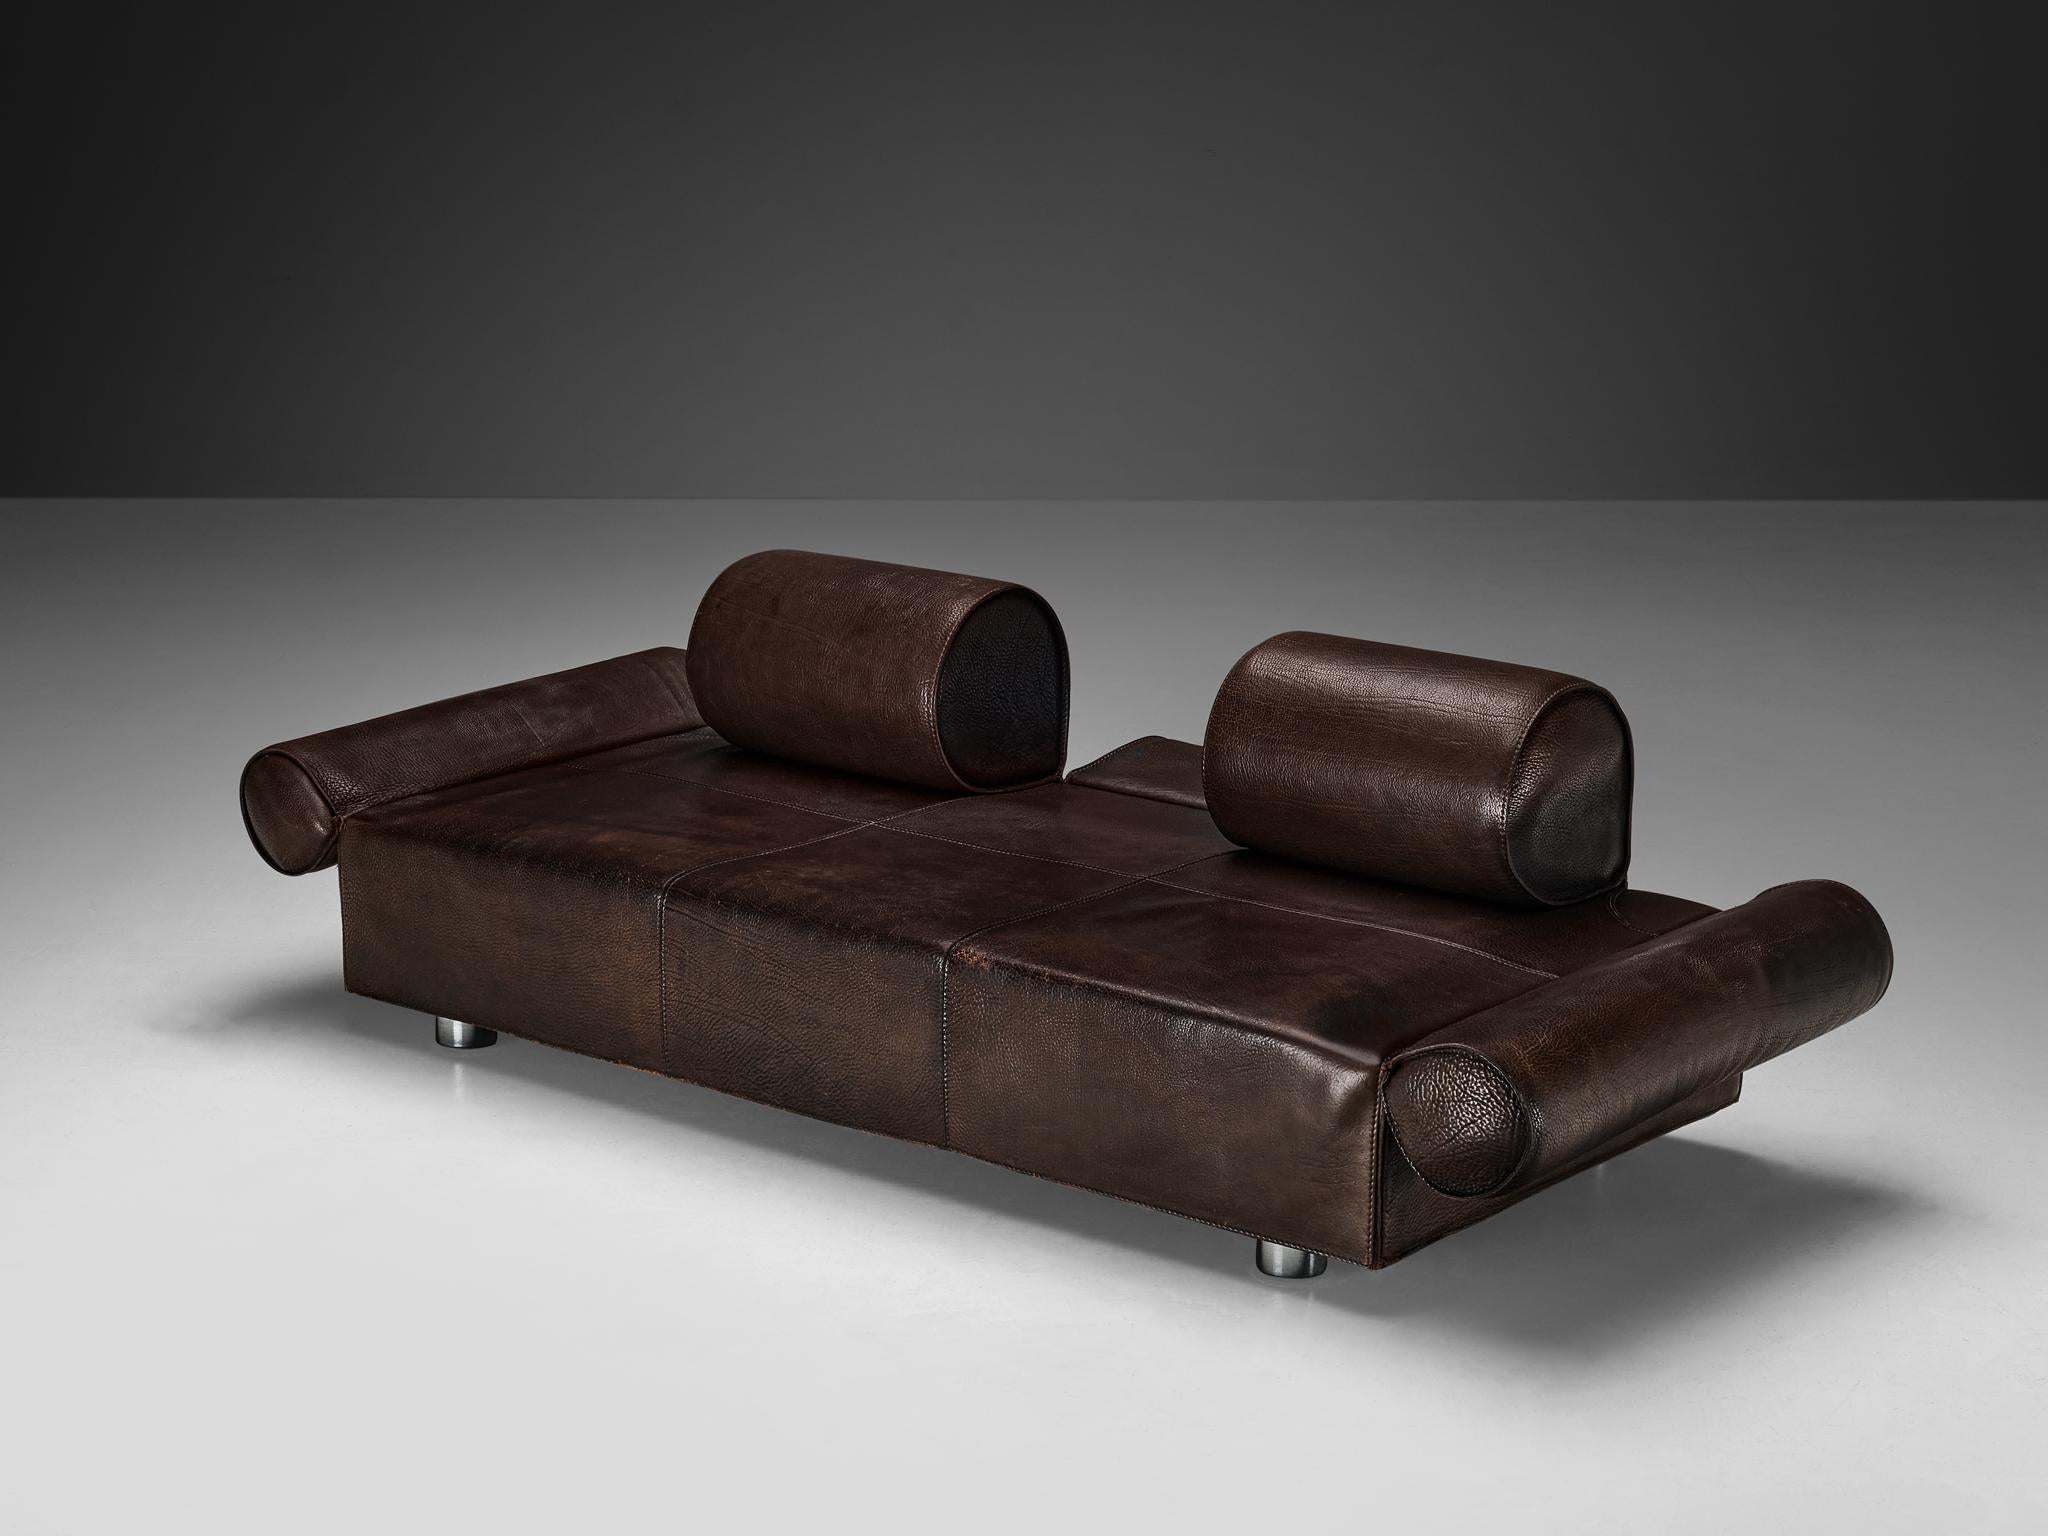 Marzio Cecchi three-seat sofa, buffalo leather, chromed metal, metal, Italy, 1970s

In the dynamic landscape of 1970s furniture design, Marzio Cecchi's three-seat sofa emerges as a masterpiece of form and function. Crafted from luxurious buffalo